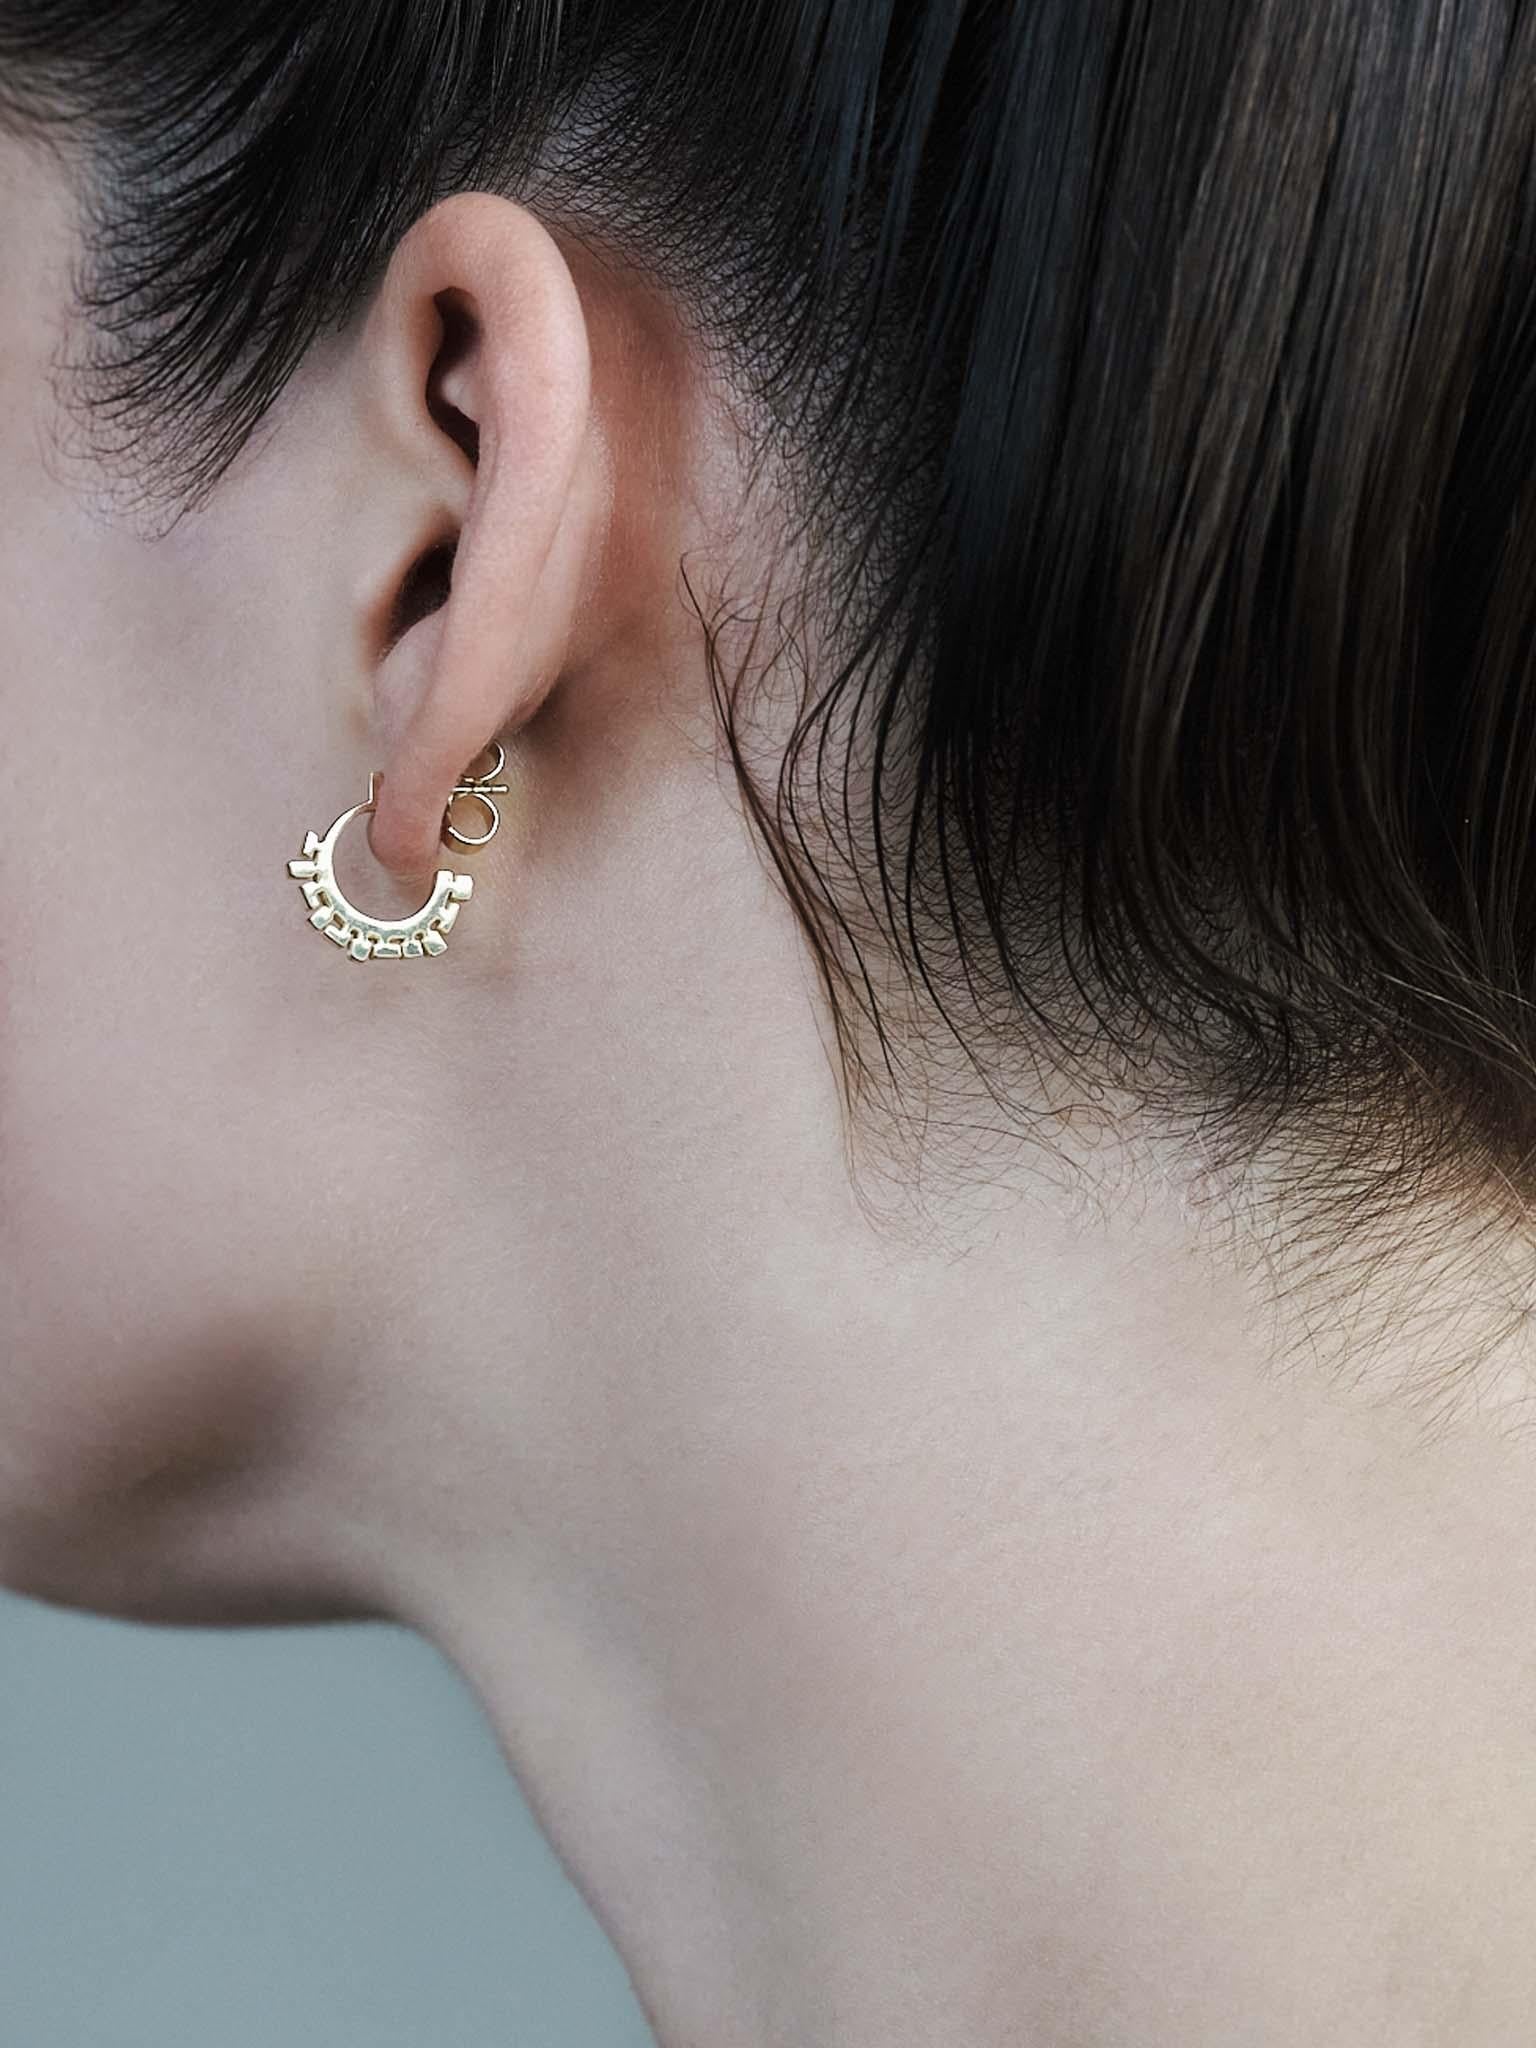 Introducing the CROON collection. The idea of this collection is to create jewelry with patterns and shapes in which each individual sees something different.

We work in partnership with Pierredes, a Dutch company that, like us, uses only fair gold